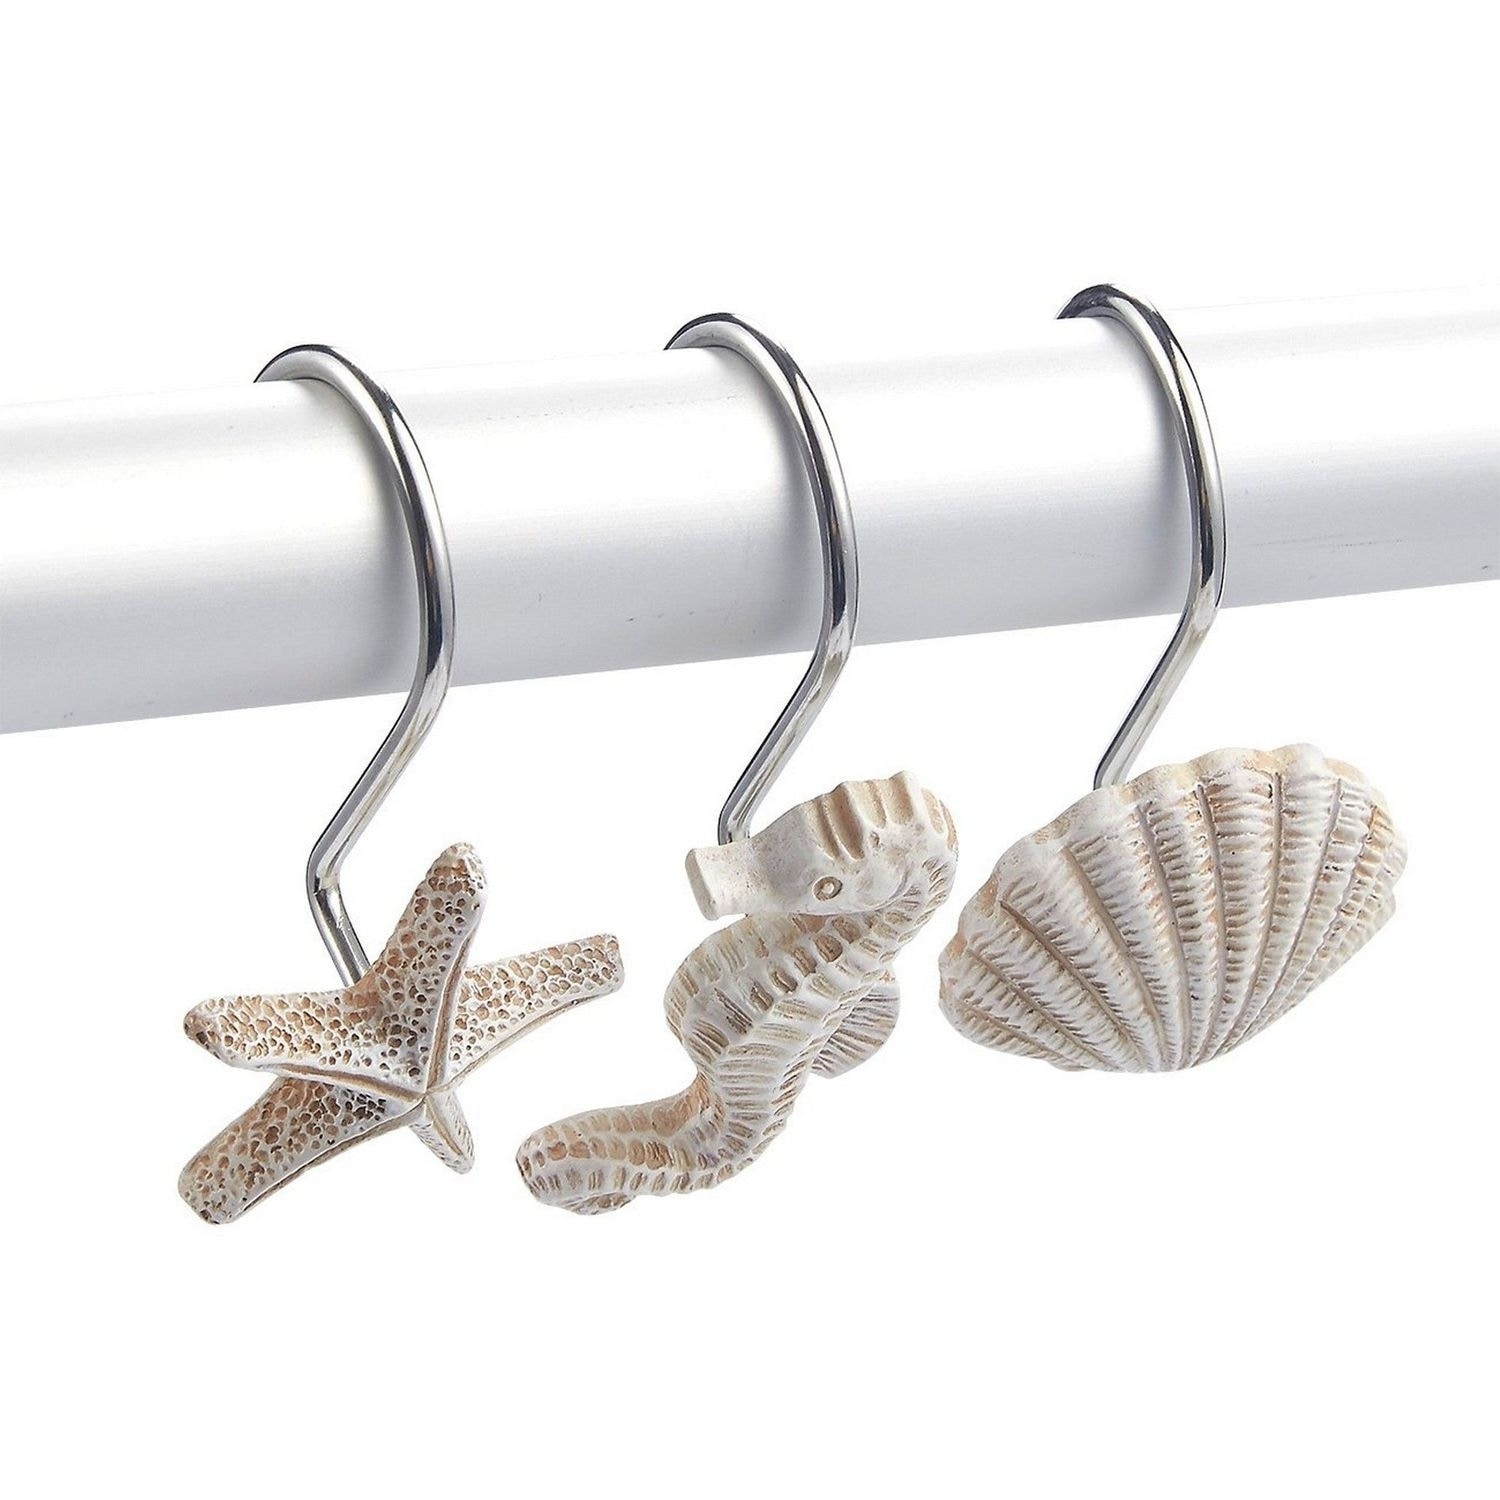  Avanti Linens - Shower Curtain Hooks, Seashell Inspired  Bathroom Accessories, Set of 12 (Sequin Shell Collection) : Home & Kitchen